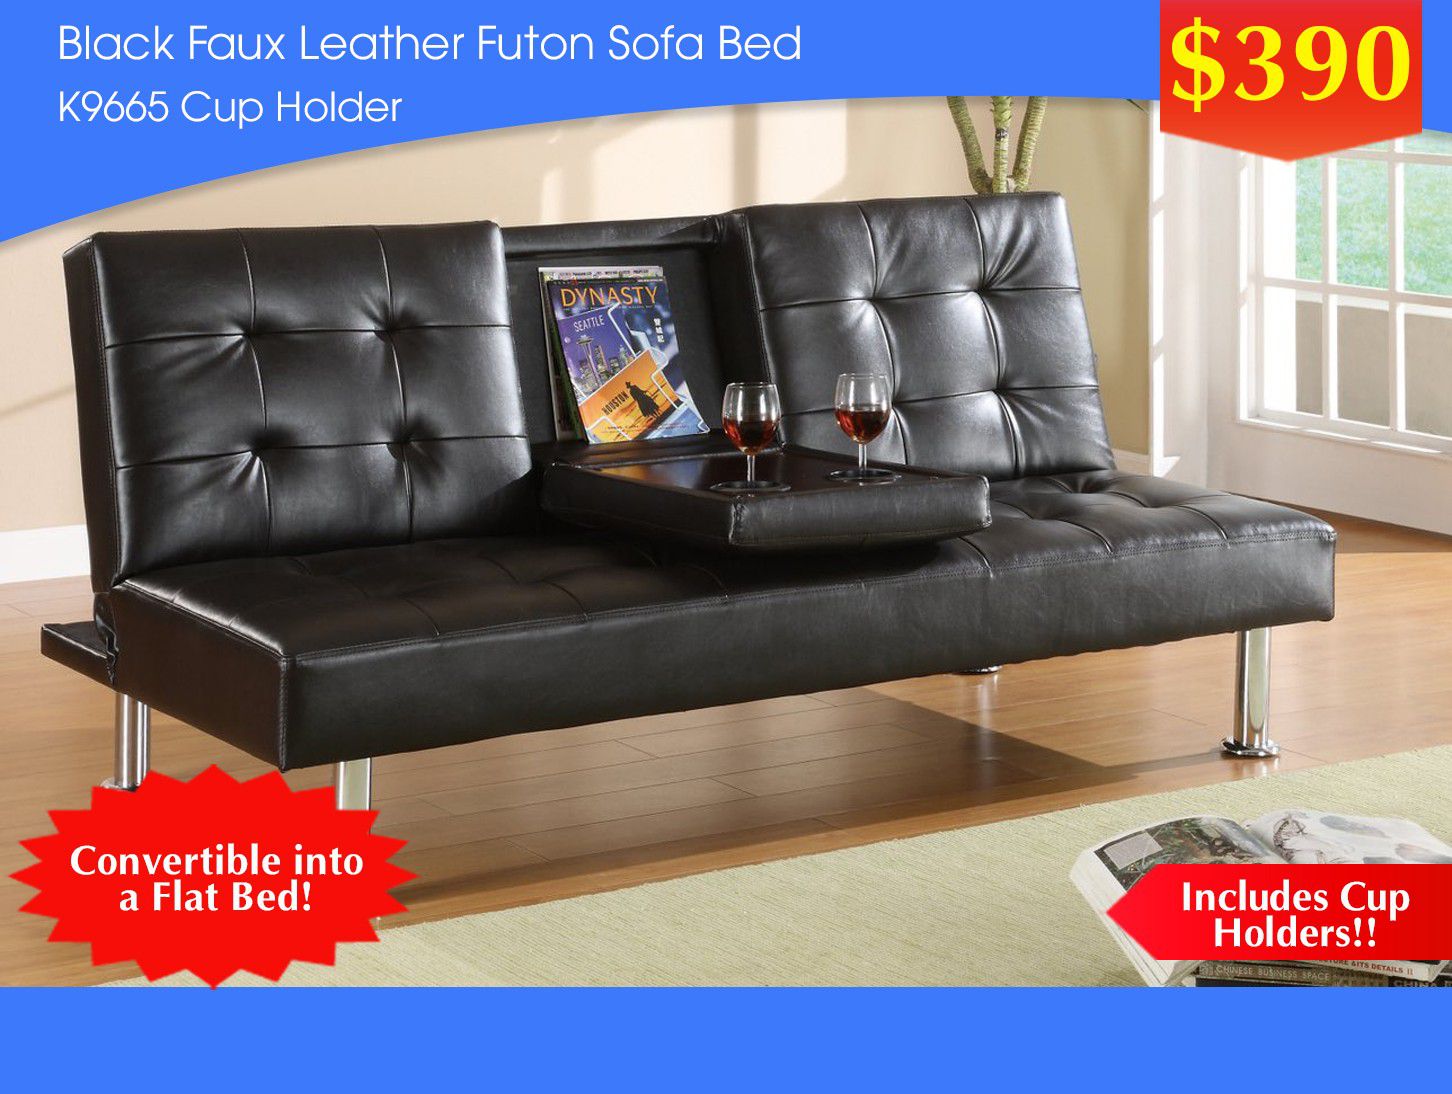 BLACK FAUX LEATHER FUTON SOFA BED K9665 CUP HOLDER